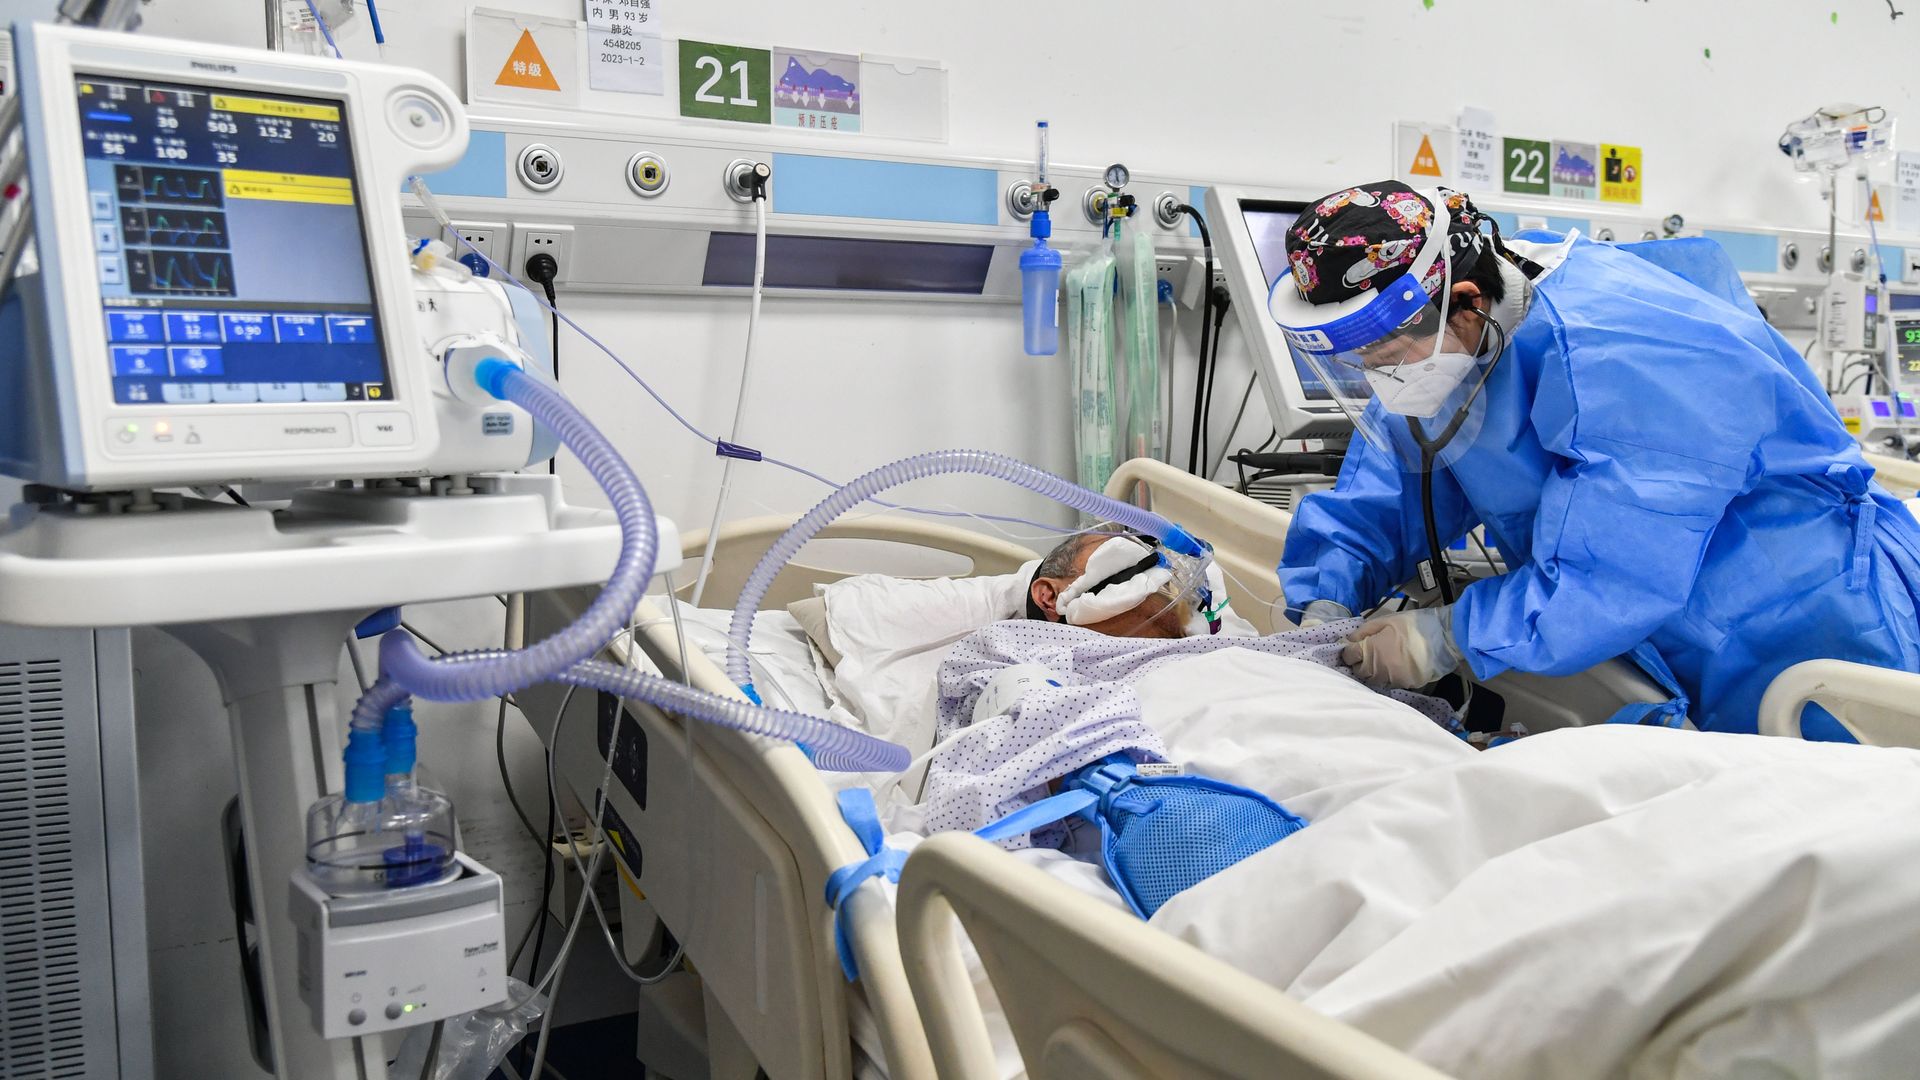 A patient receives treatment at Peking University Third Hospital on January 3, 2023 in Beijing, China.